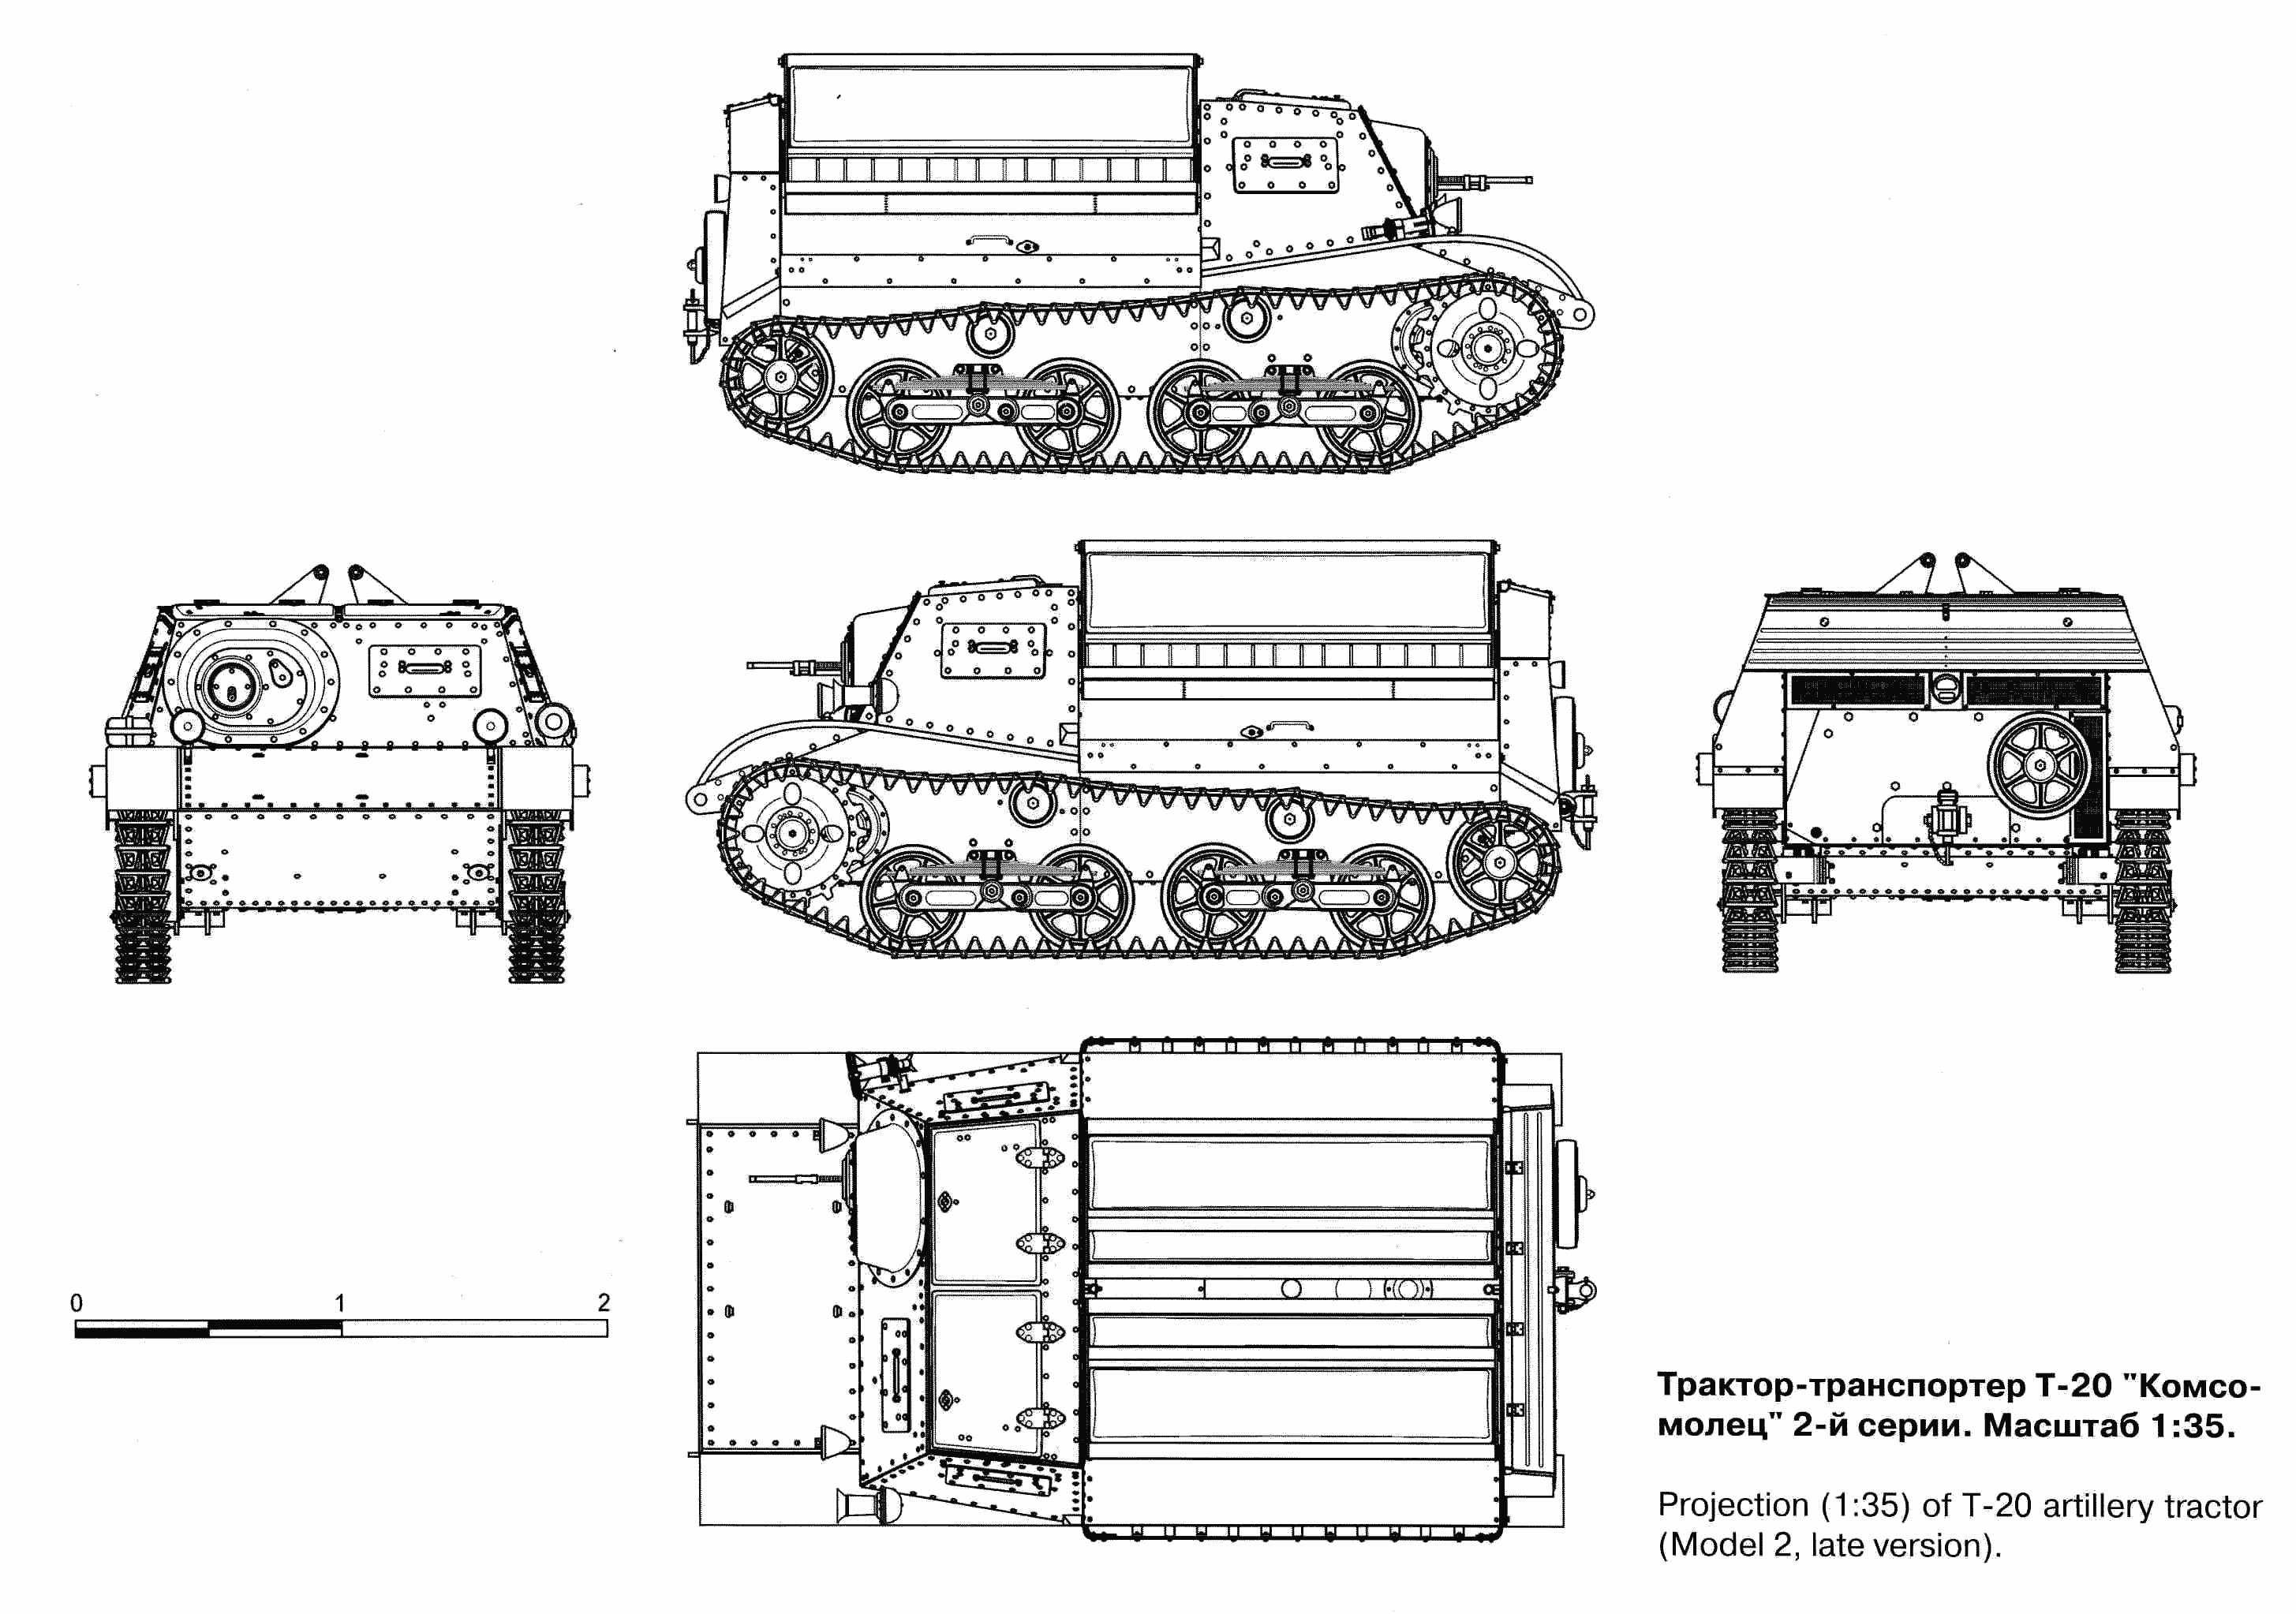 A technical drawing of the Komsomolets.